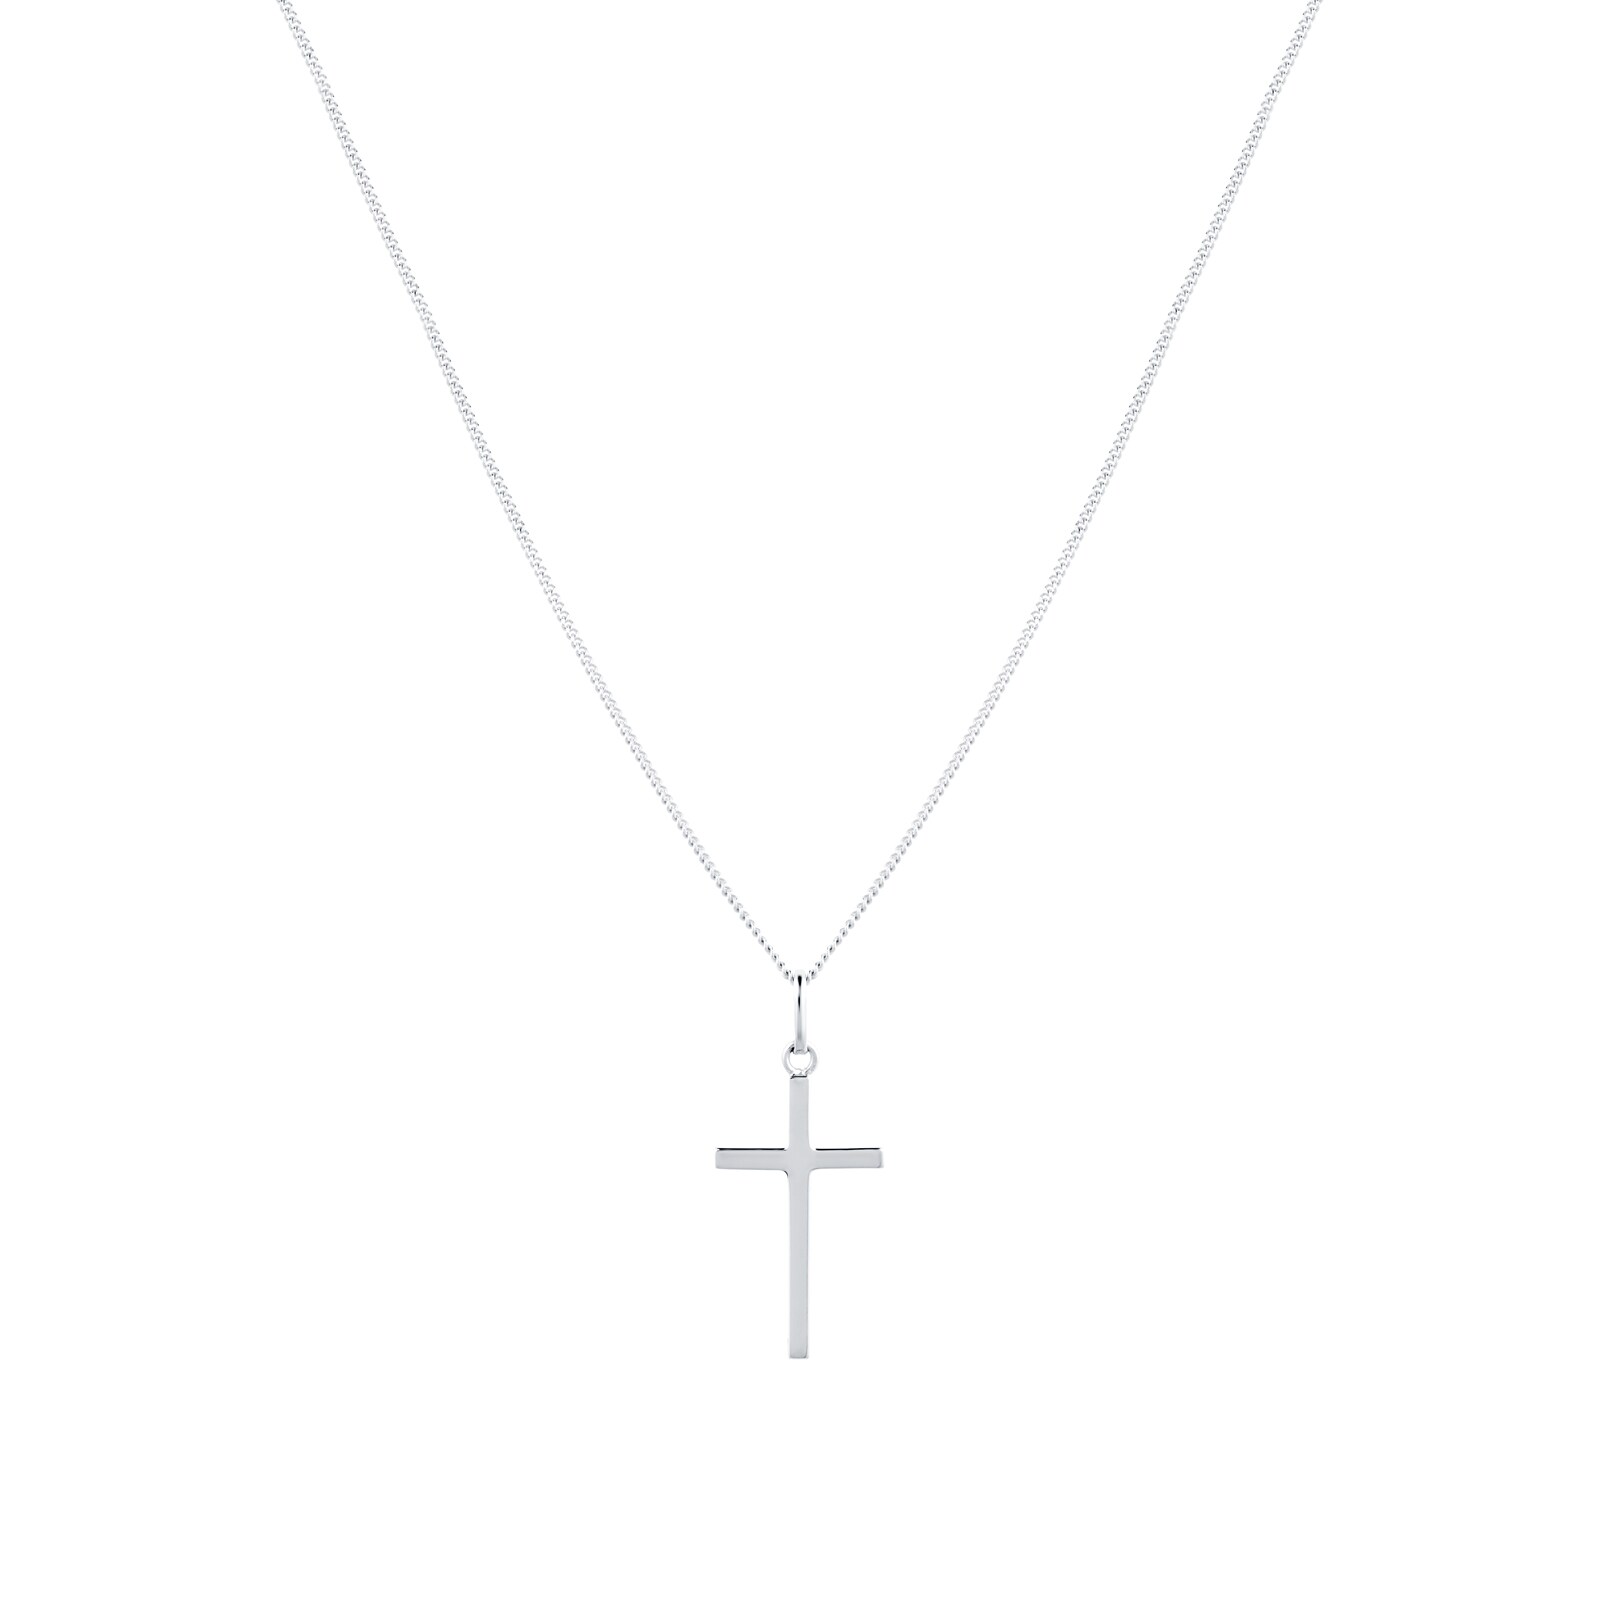 Caravaca cross ~ gold-plated sterling silver